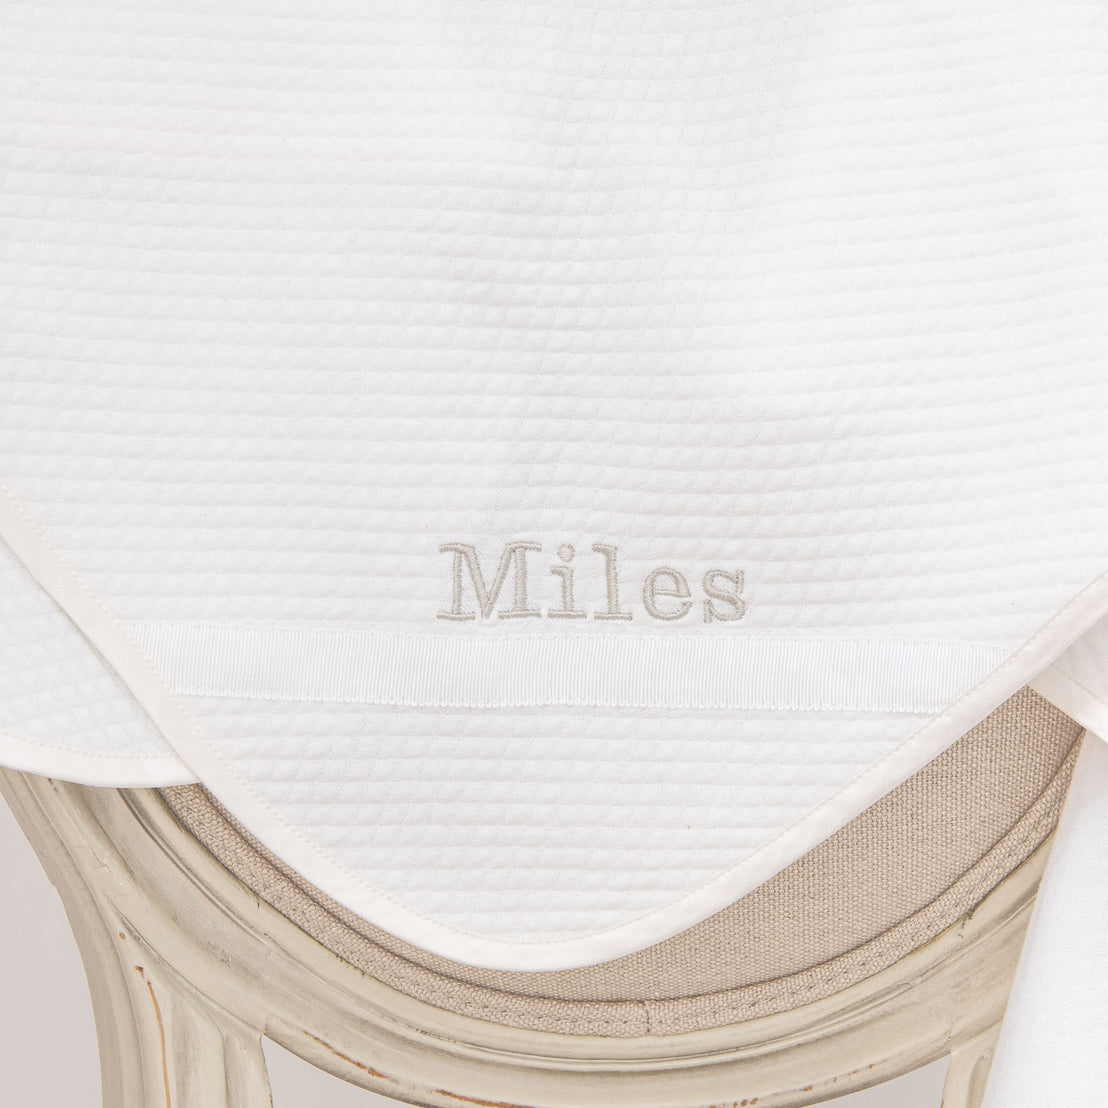 Miles Personalized Blanket